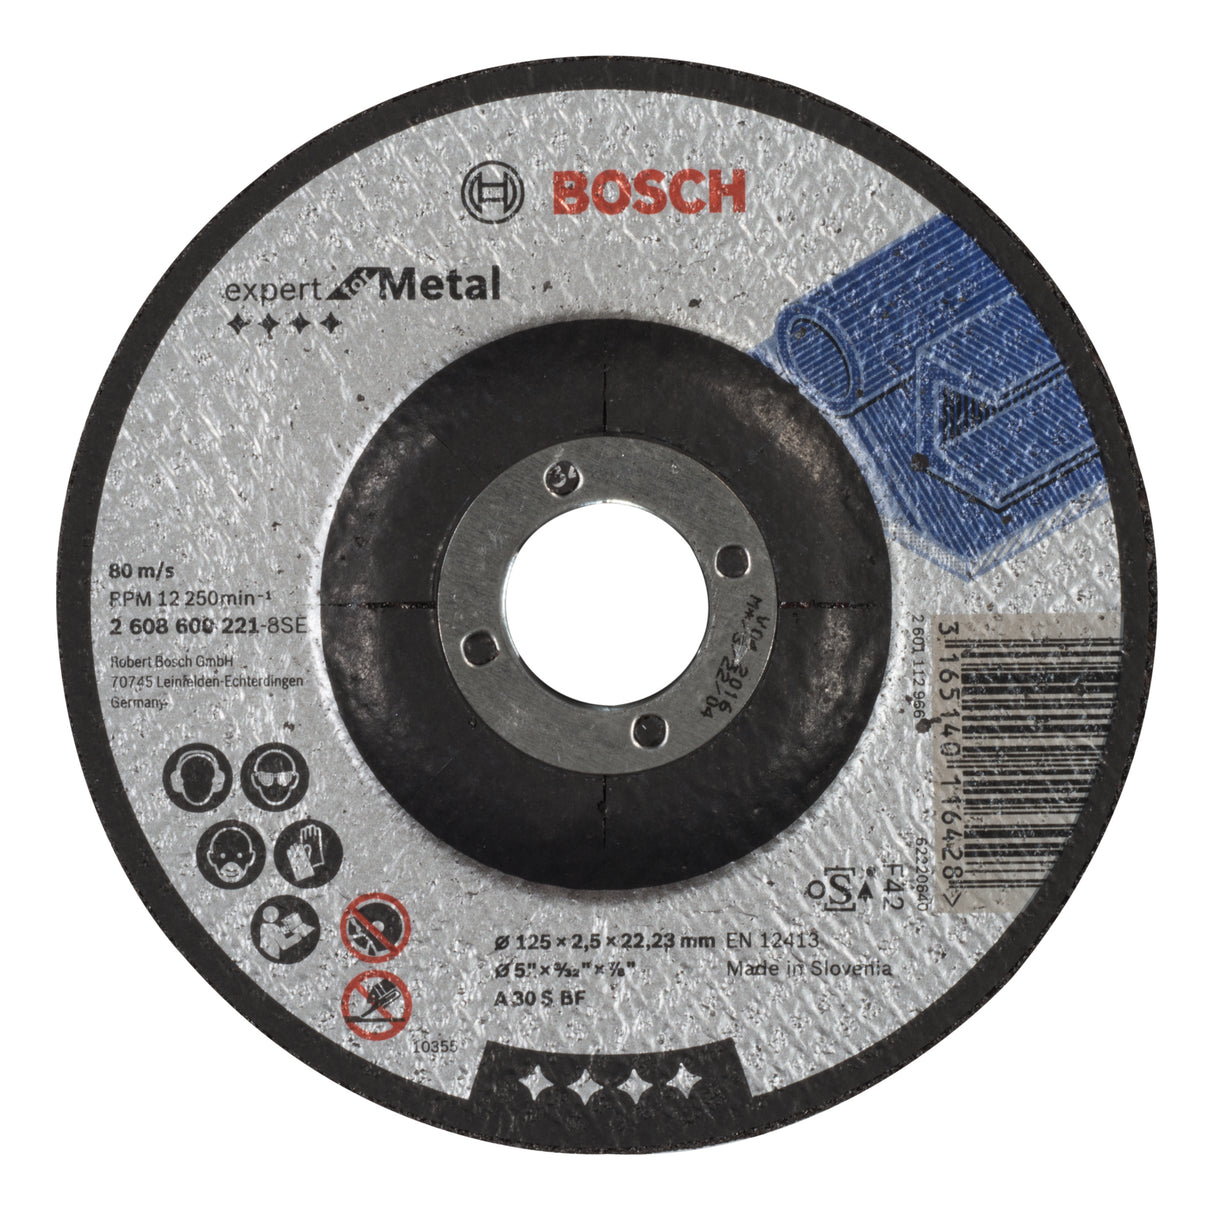 Bosch Professional Expert Metal Cutting Disc with Depressed Centre A 30 S BF, 125mm x 2.5mm